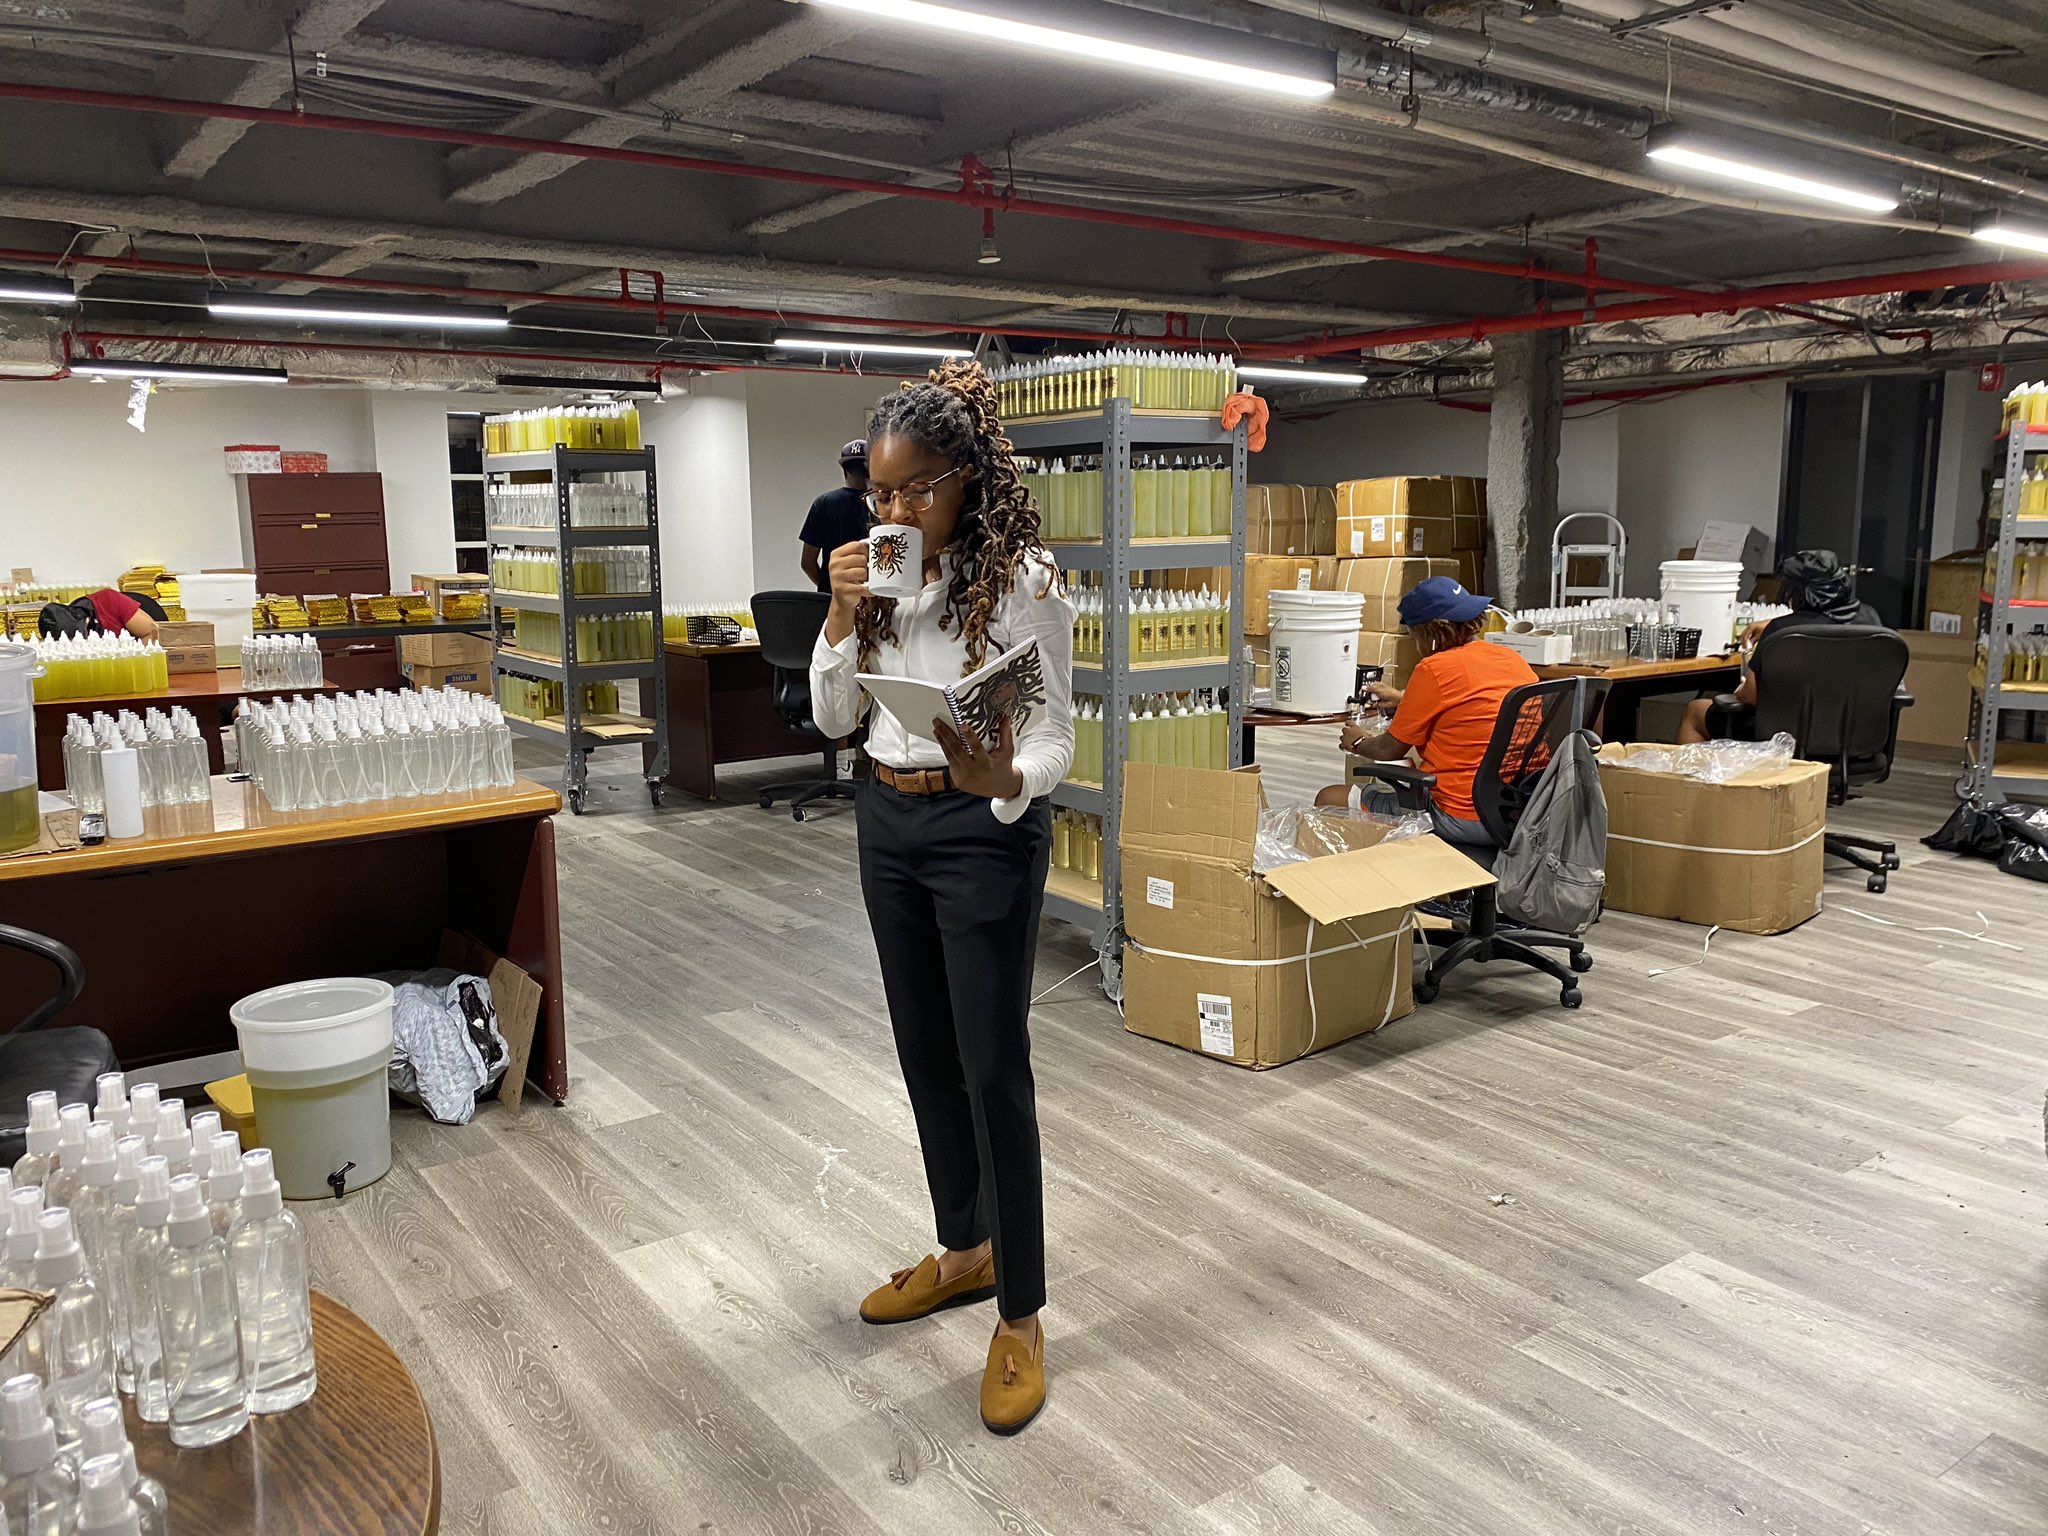 A young lady's business succeeds, migrates from bedroom to warehouse